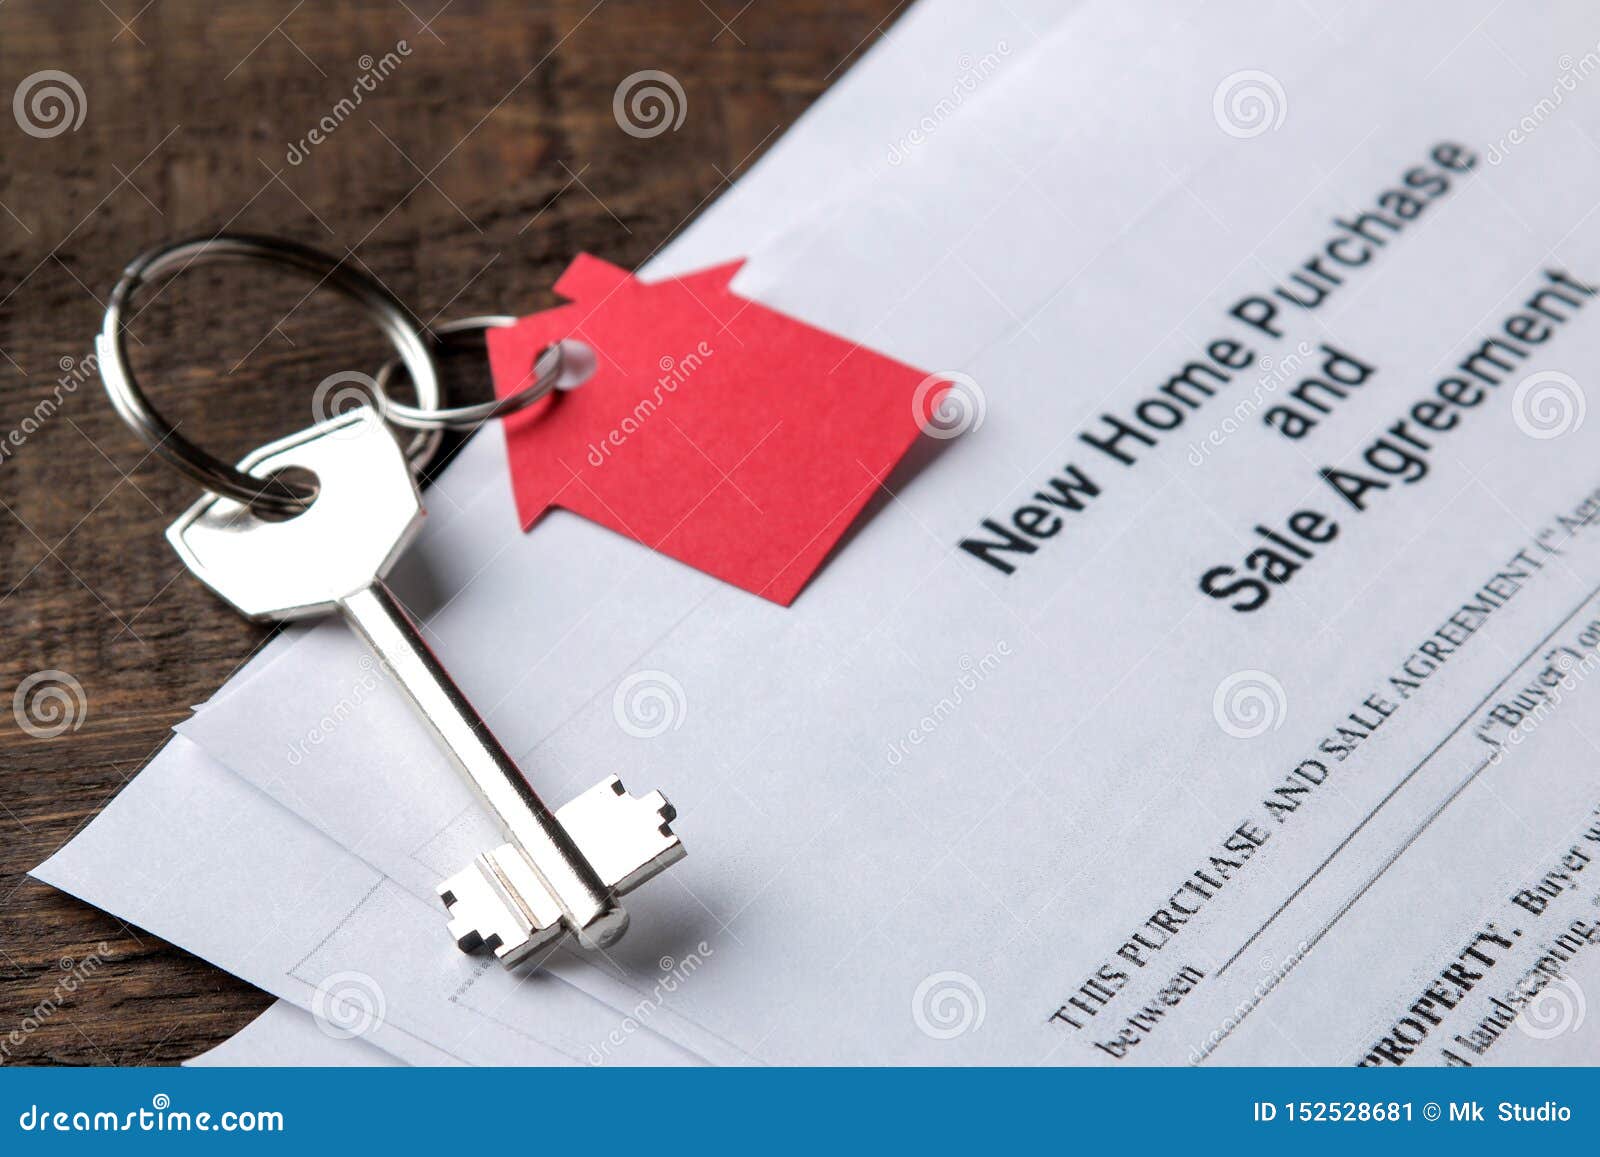 new home purchase and sale agreement. key with keyring and blank on a brown wooden table. concept of buying a home